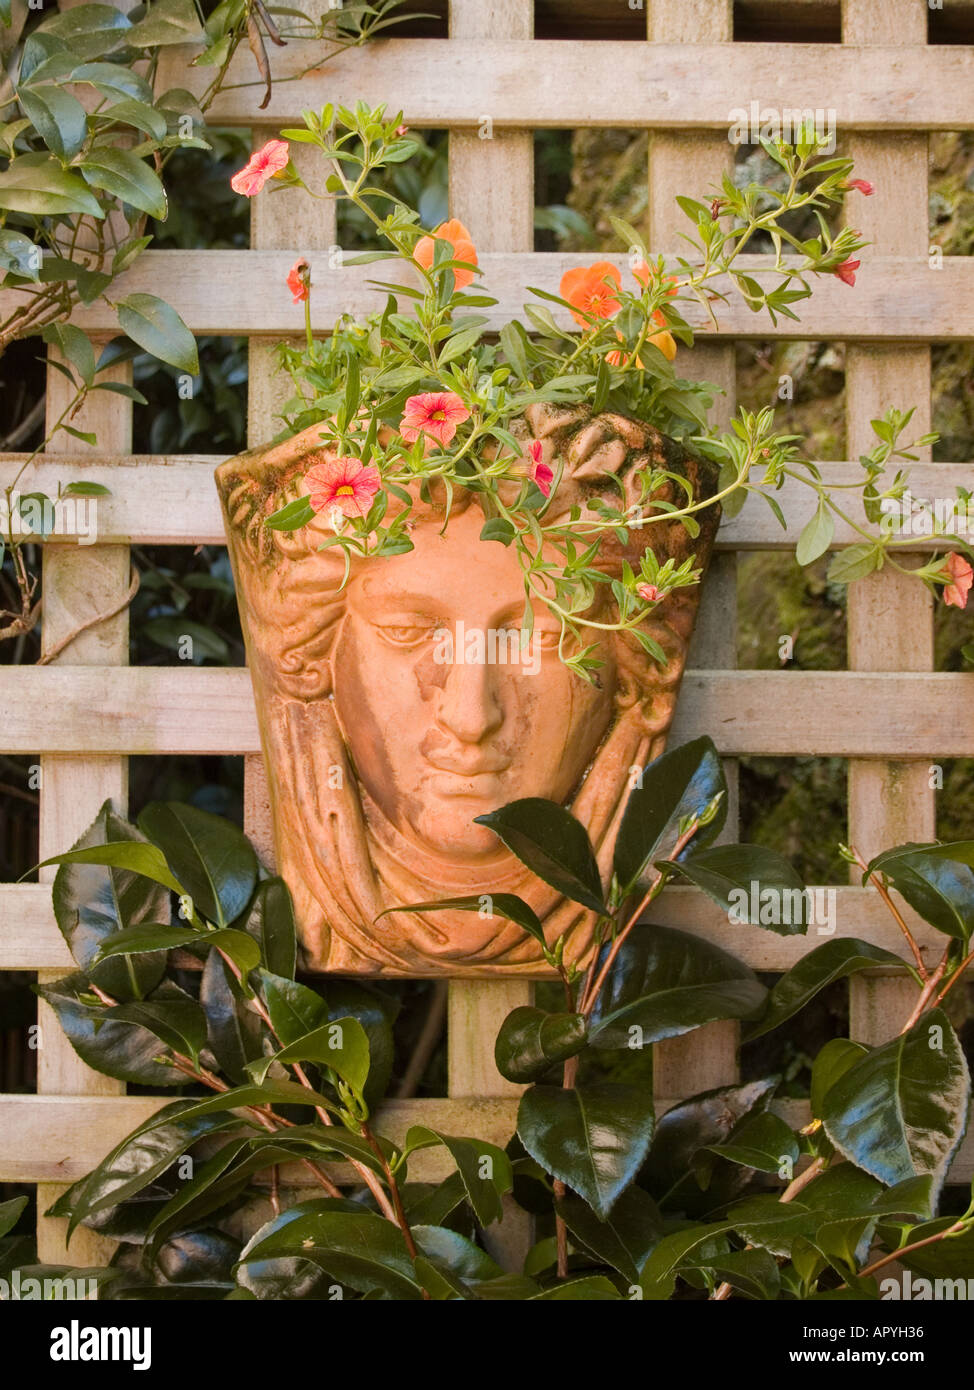 Terracotta wall planter of woman's face with orange violas and